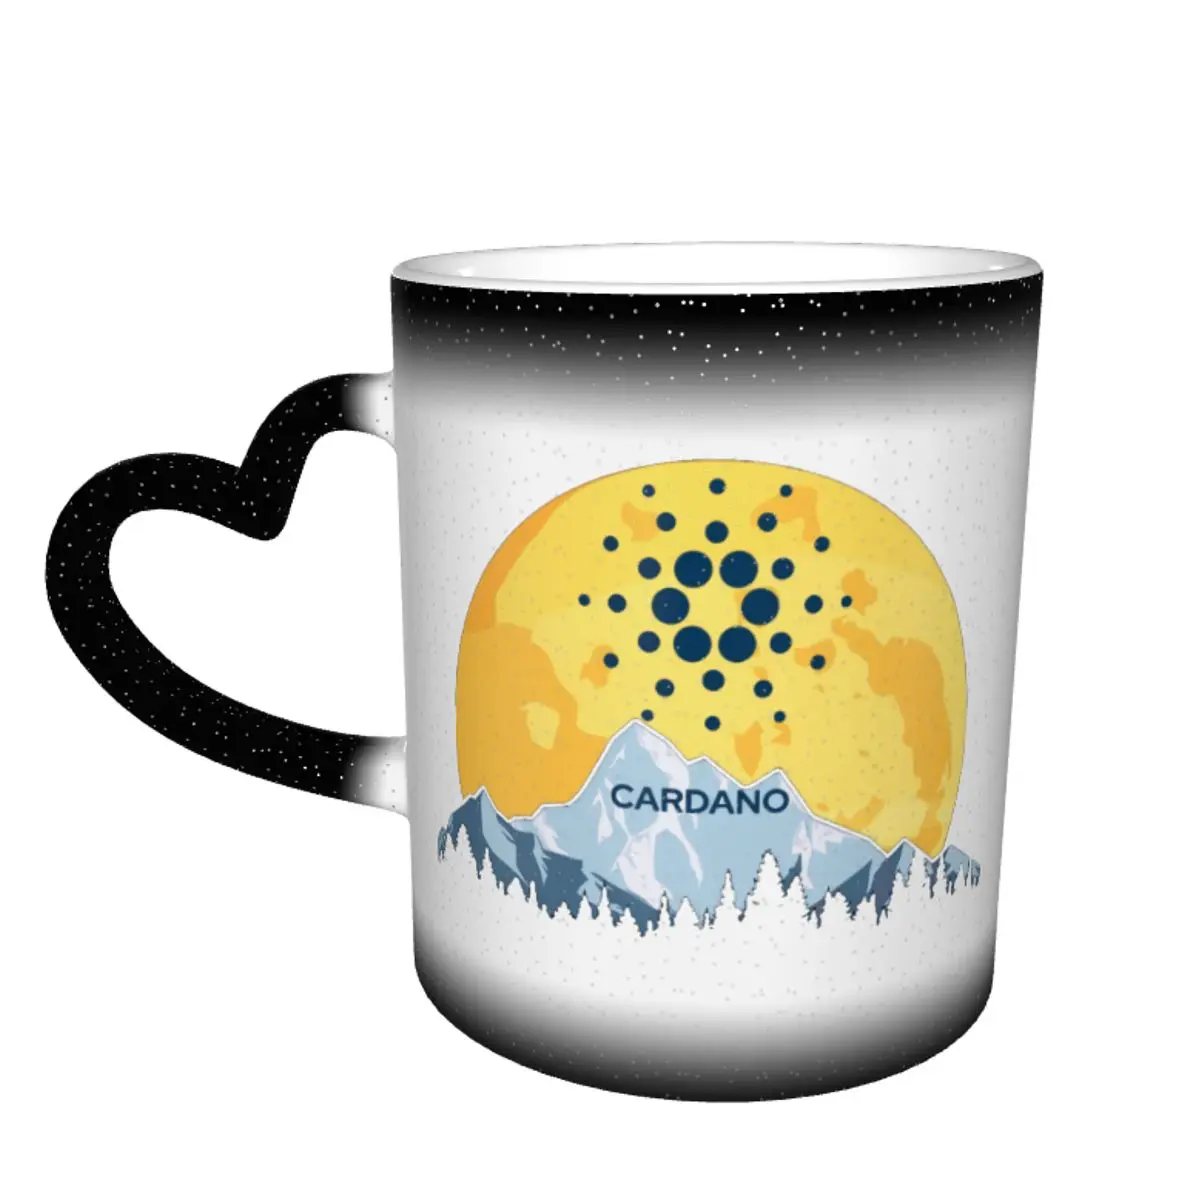 

Color Changing Mug in the Sky Cardano ADA To The Moon Cute Tether Ceramic Heat-sensitive Cup Funny Geek Tea cups